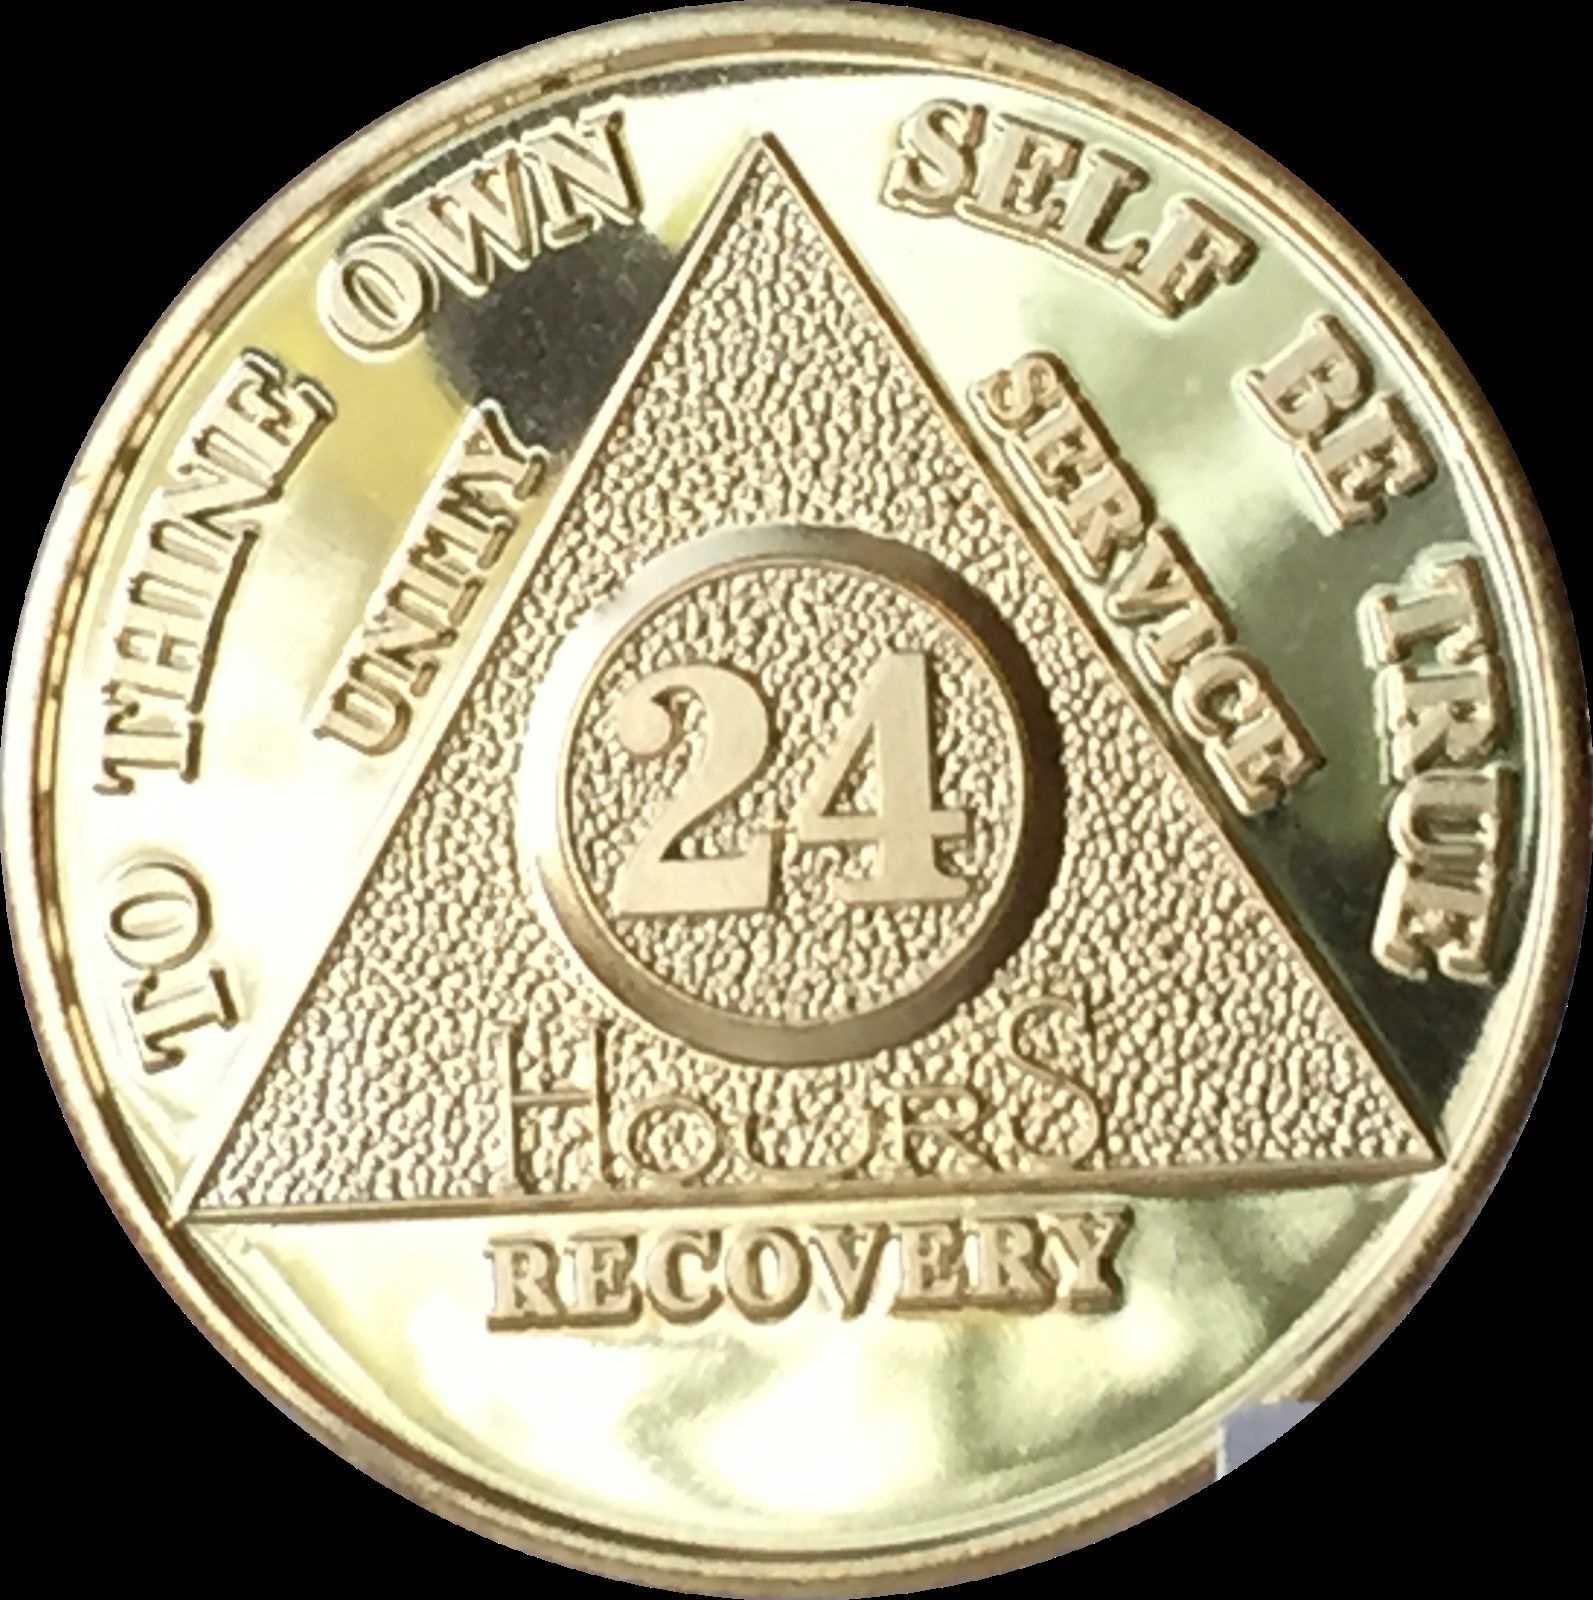 24 Hours AA Medallion 24k Gold Plated Alcoholics Anonymous Sobriety Chip